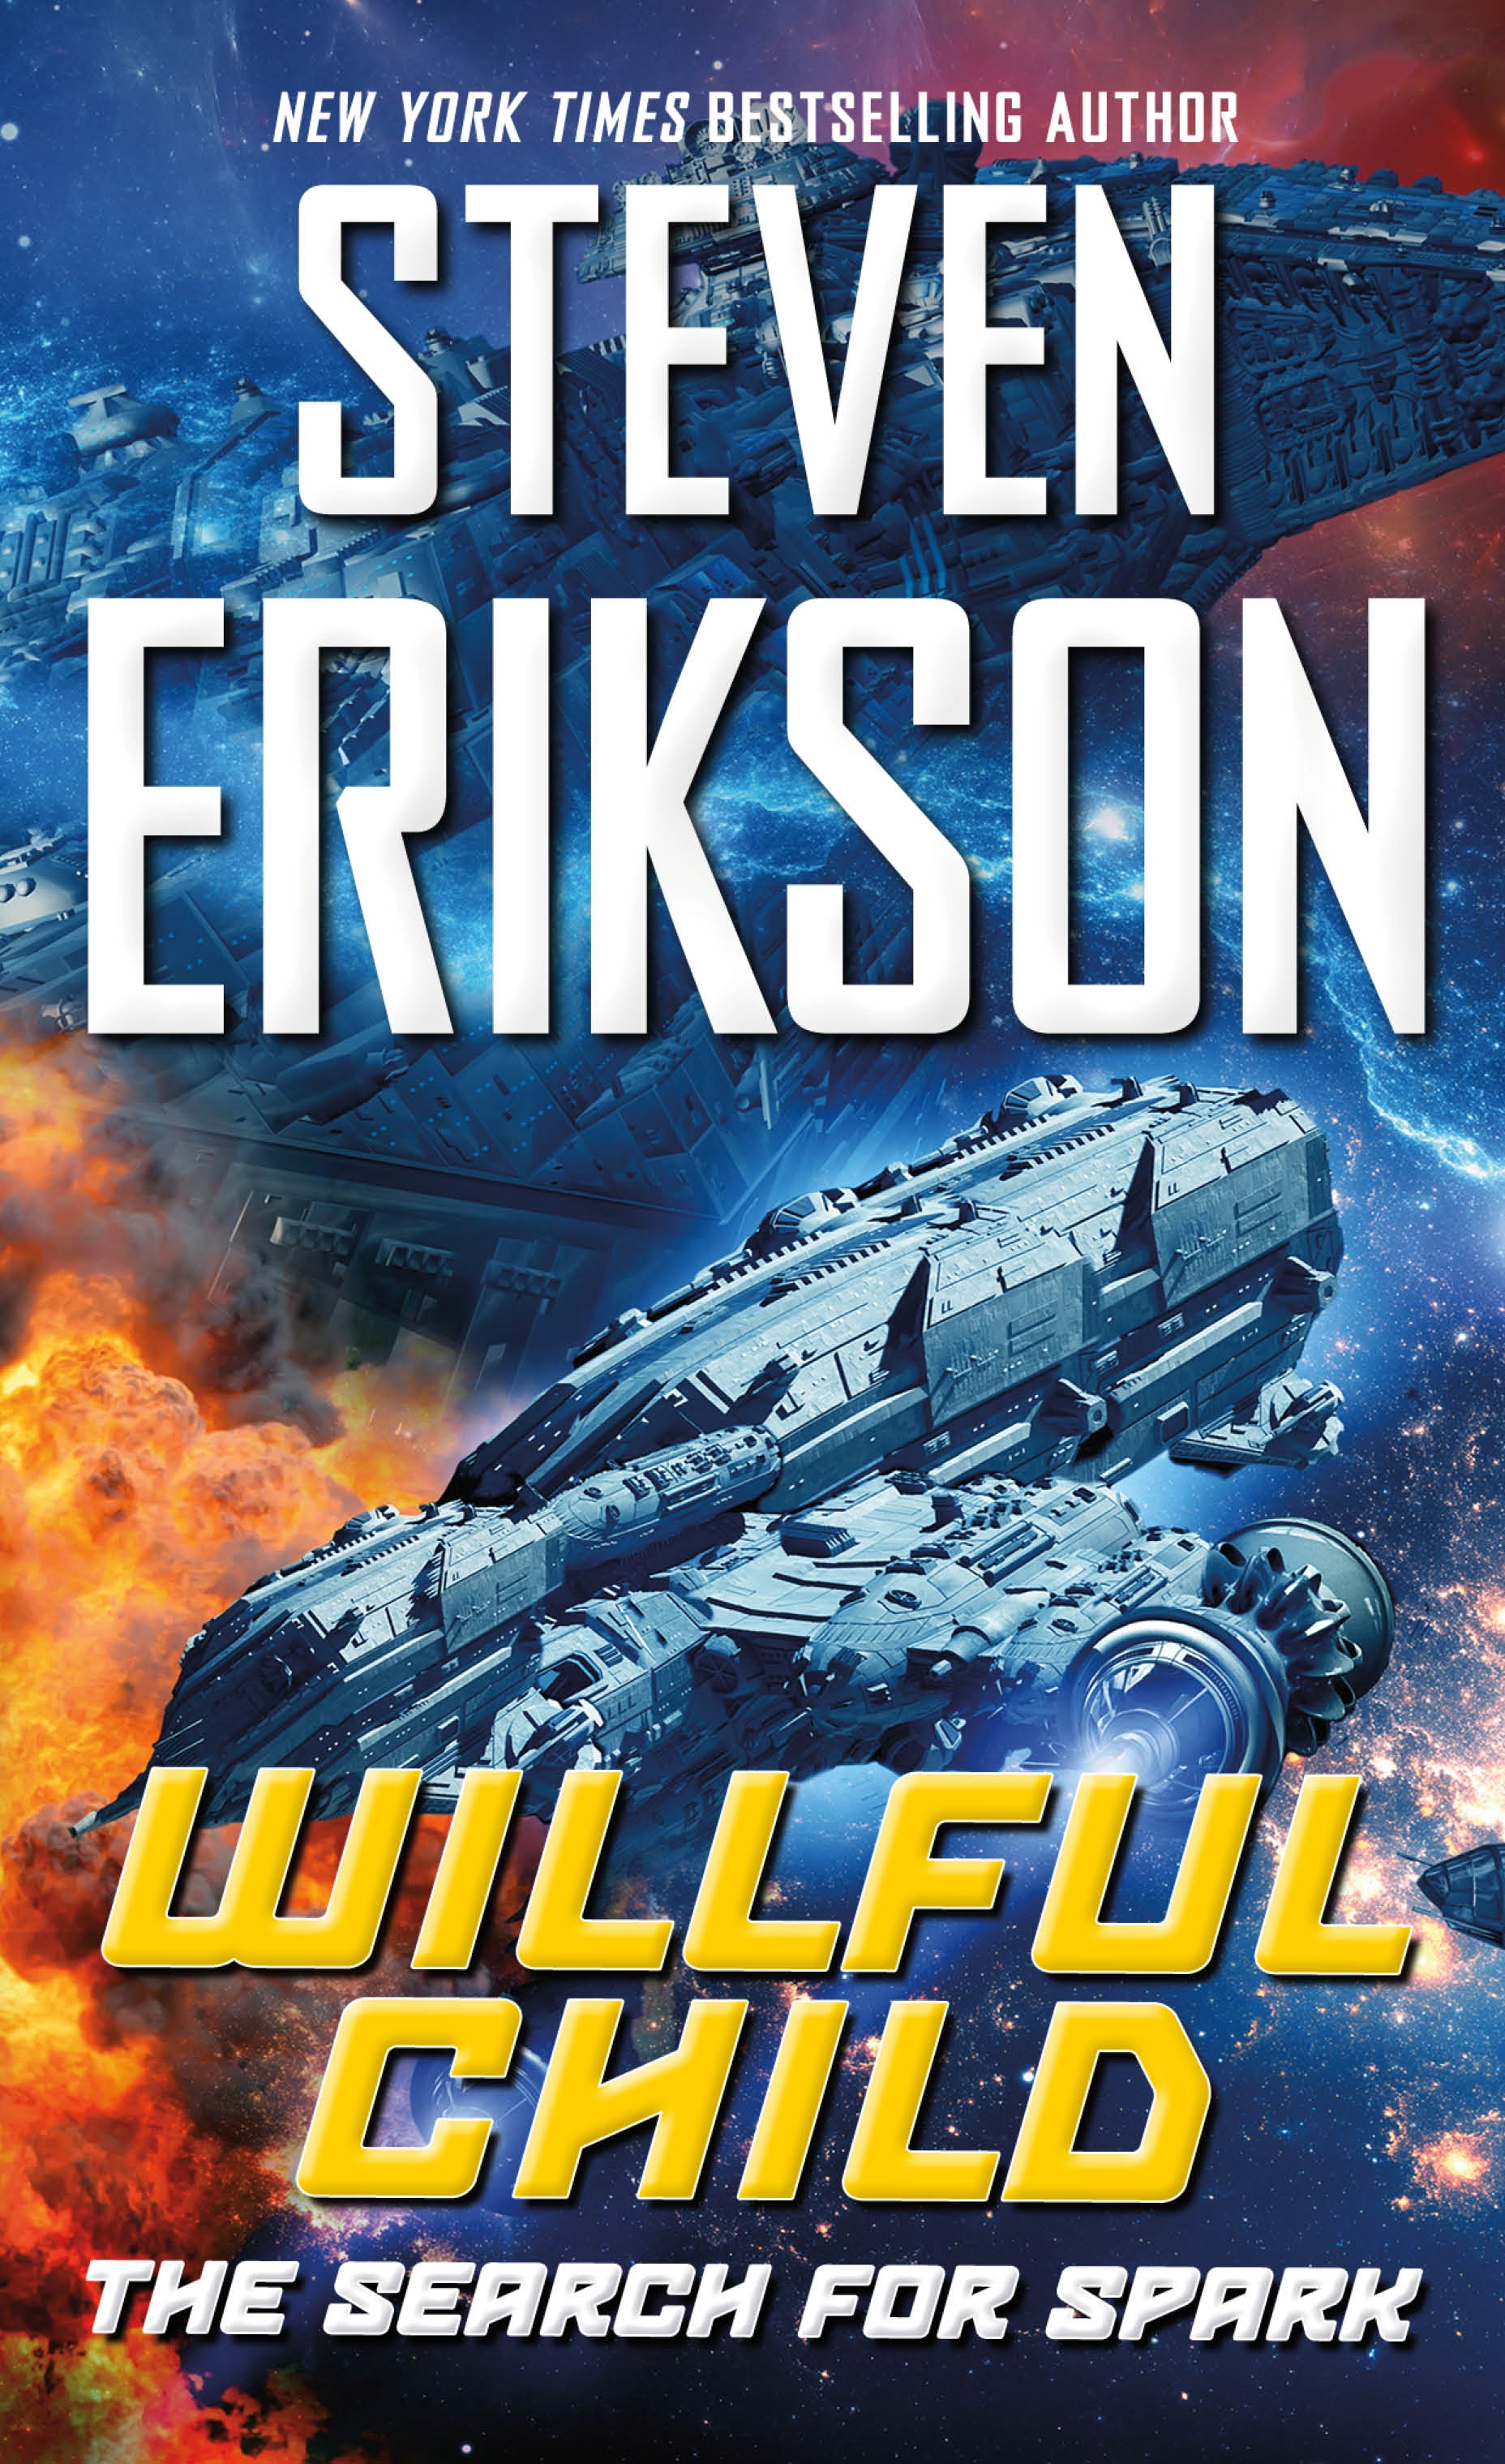 Willful Child: The Search for Spark by Steven Erikson